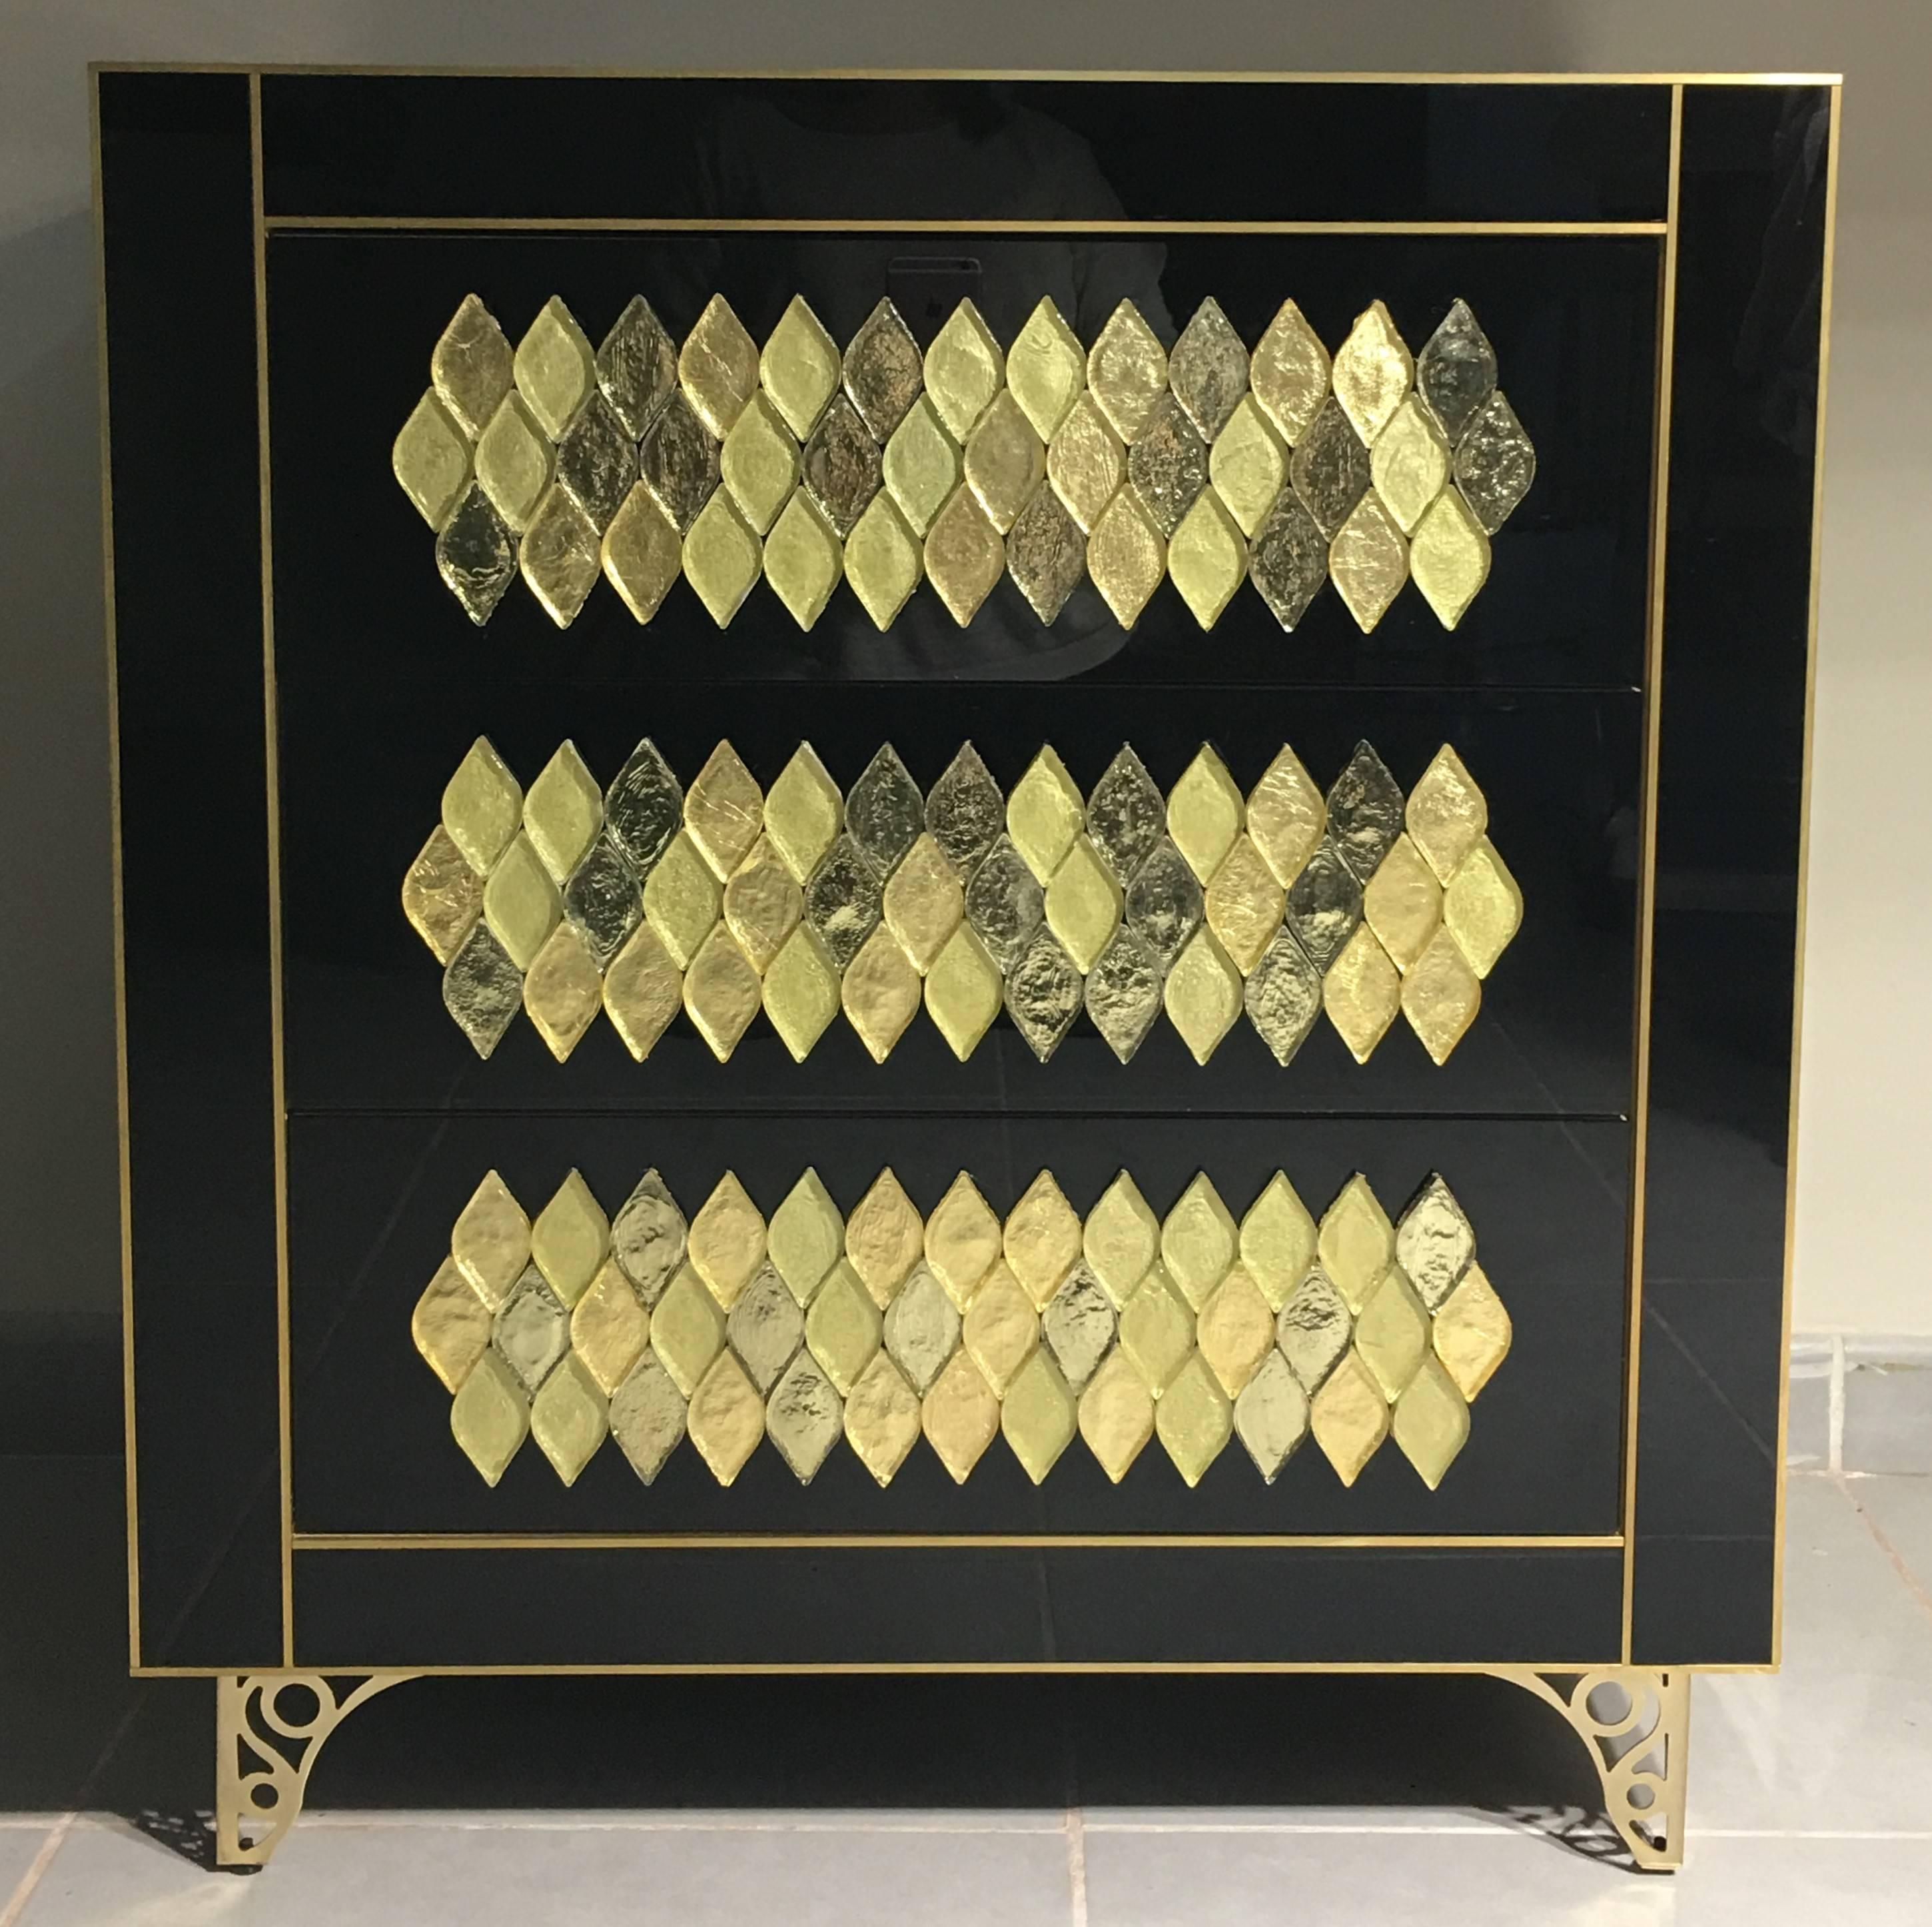 21th handmade mirrored commode or chest of drawers in Murano glass and brass inlay with three drawers
The chest are made of wood covered with colored little bit Murano glass and push system hardware for open the drawers for more comfort in